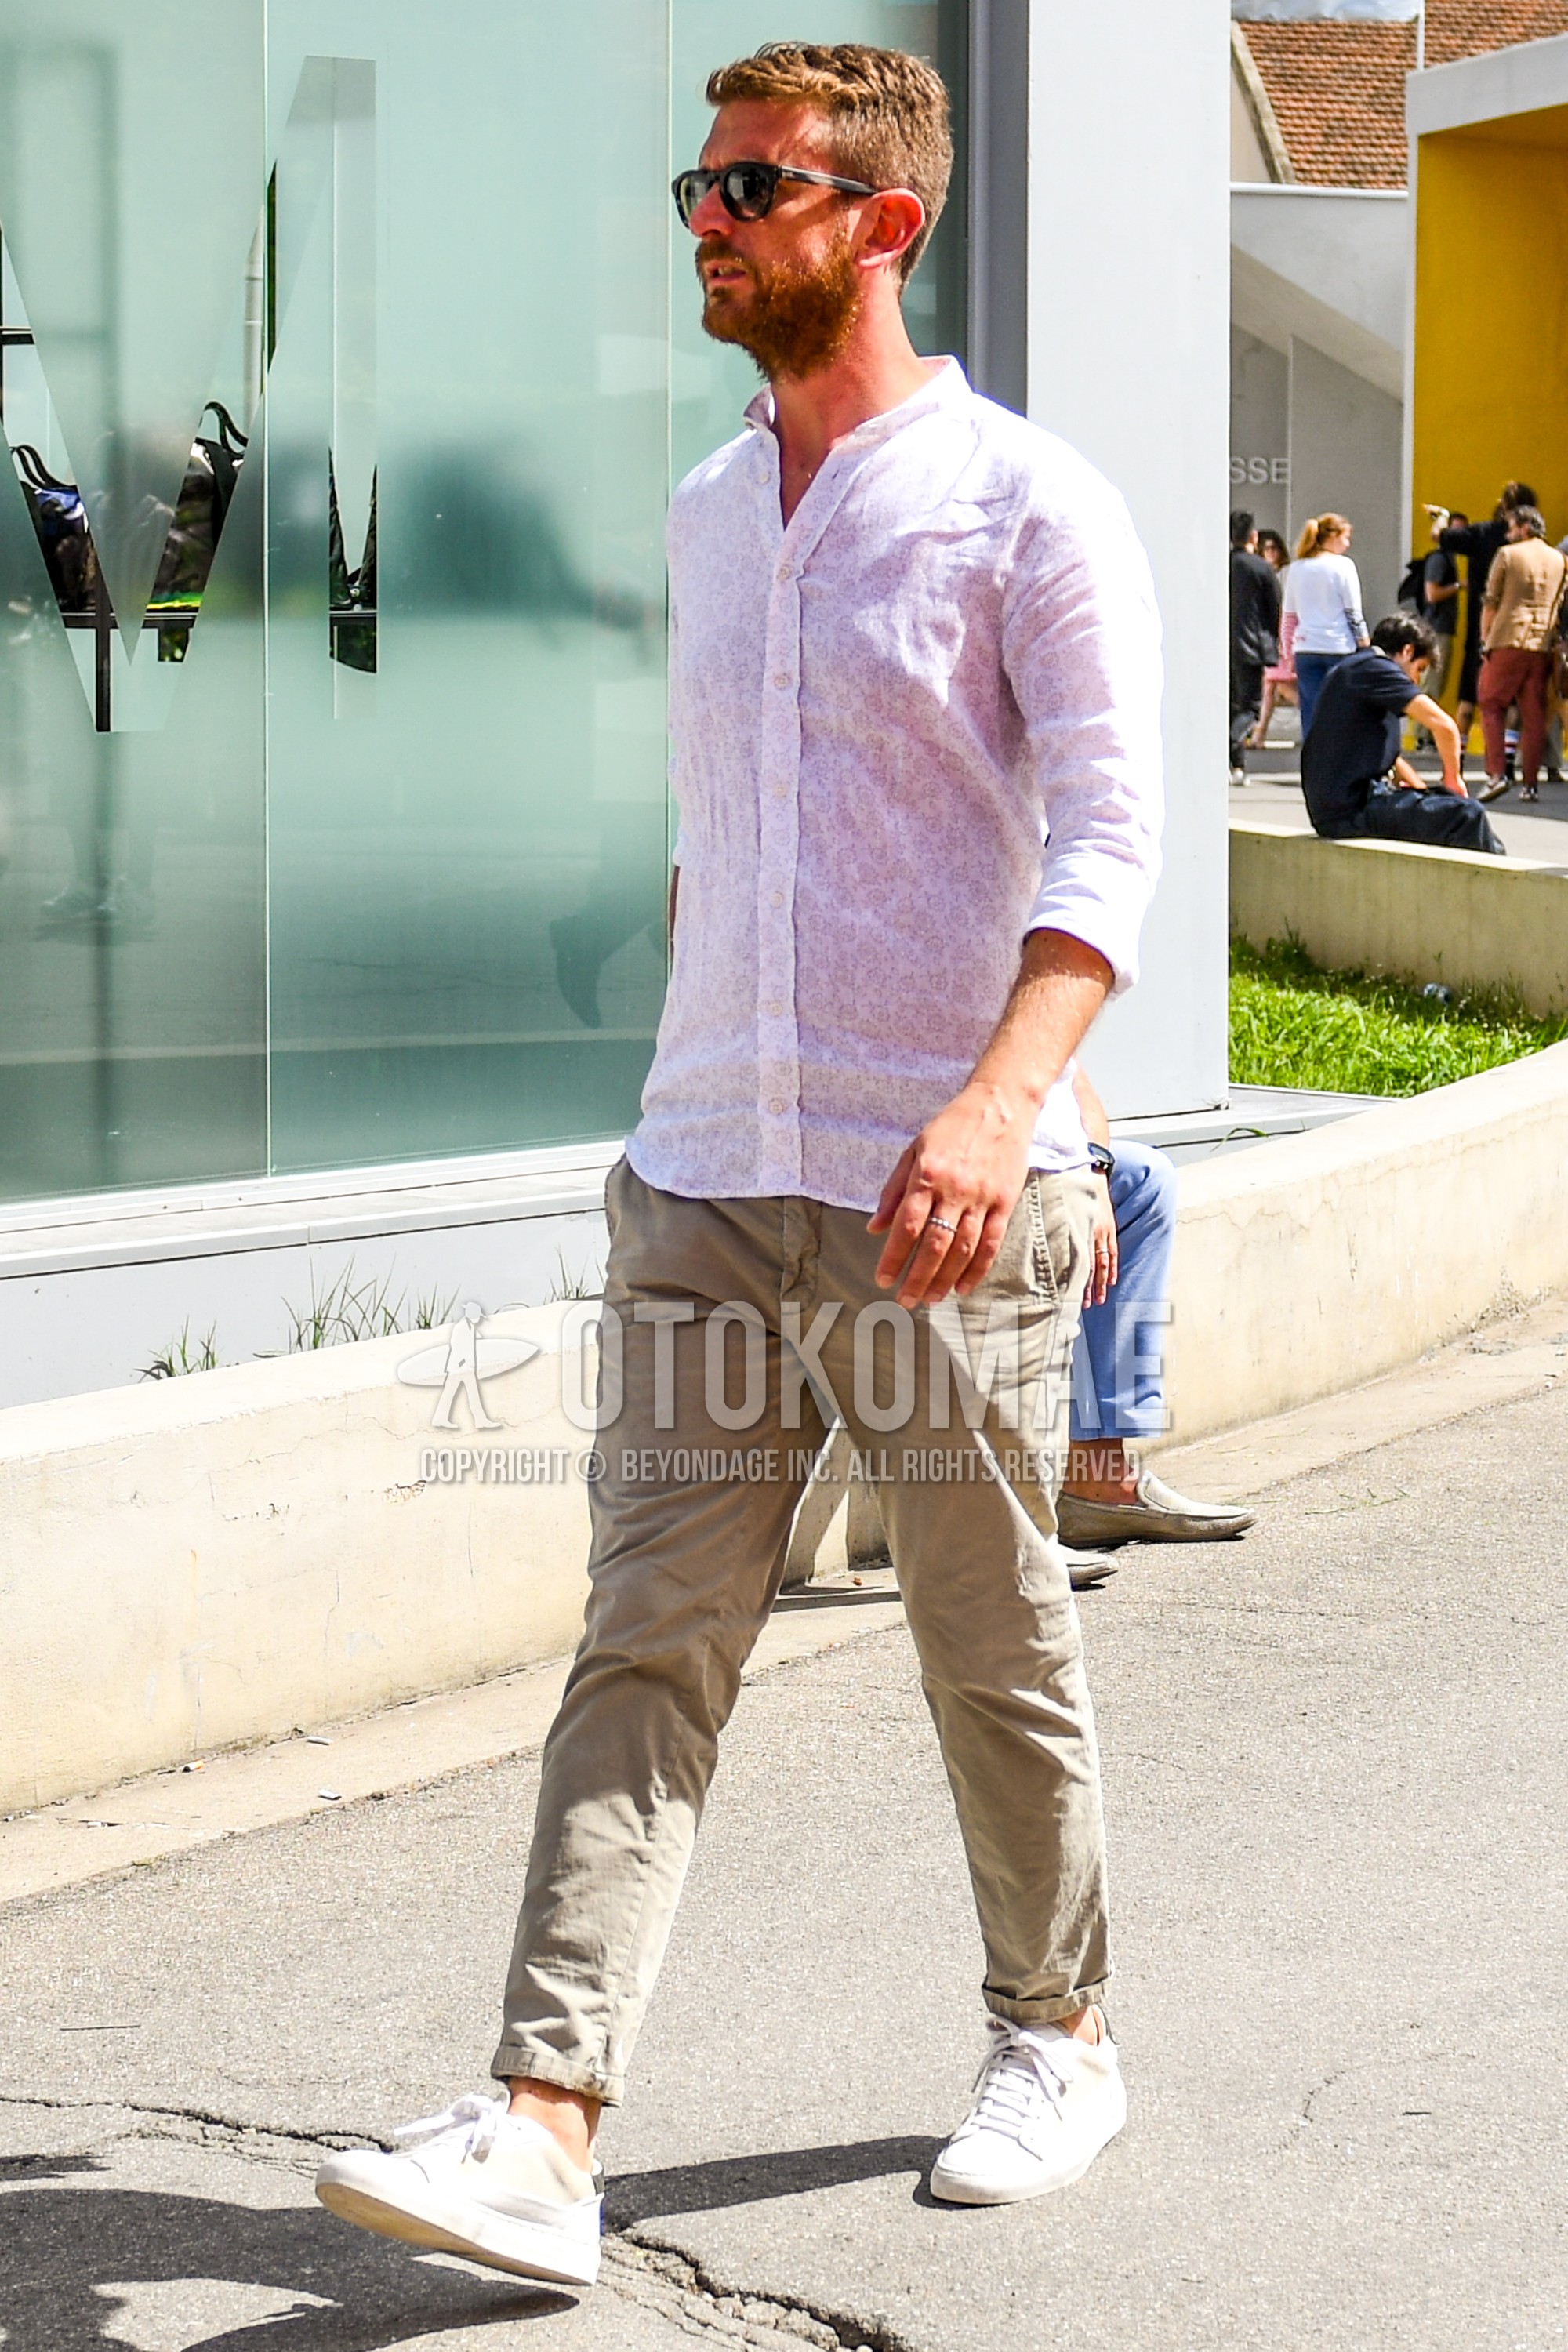 Men's spring summer outfit with plain sunglasses, white tops/innerwear shirt, beige plain chinos, white low-cut sneakers.